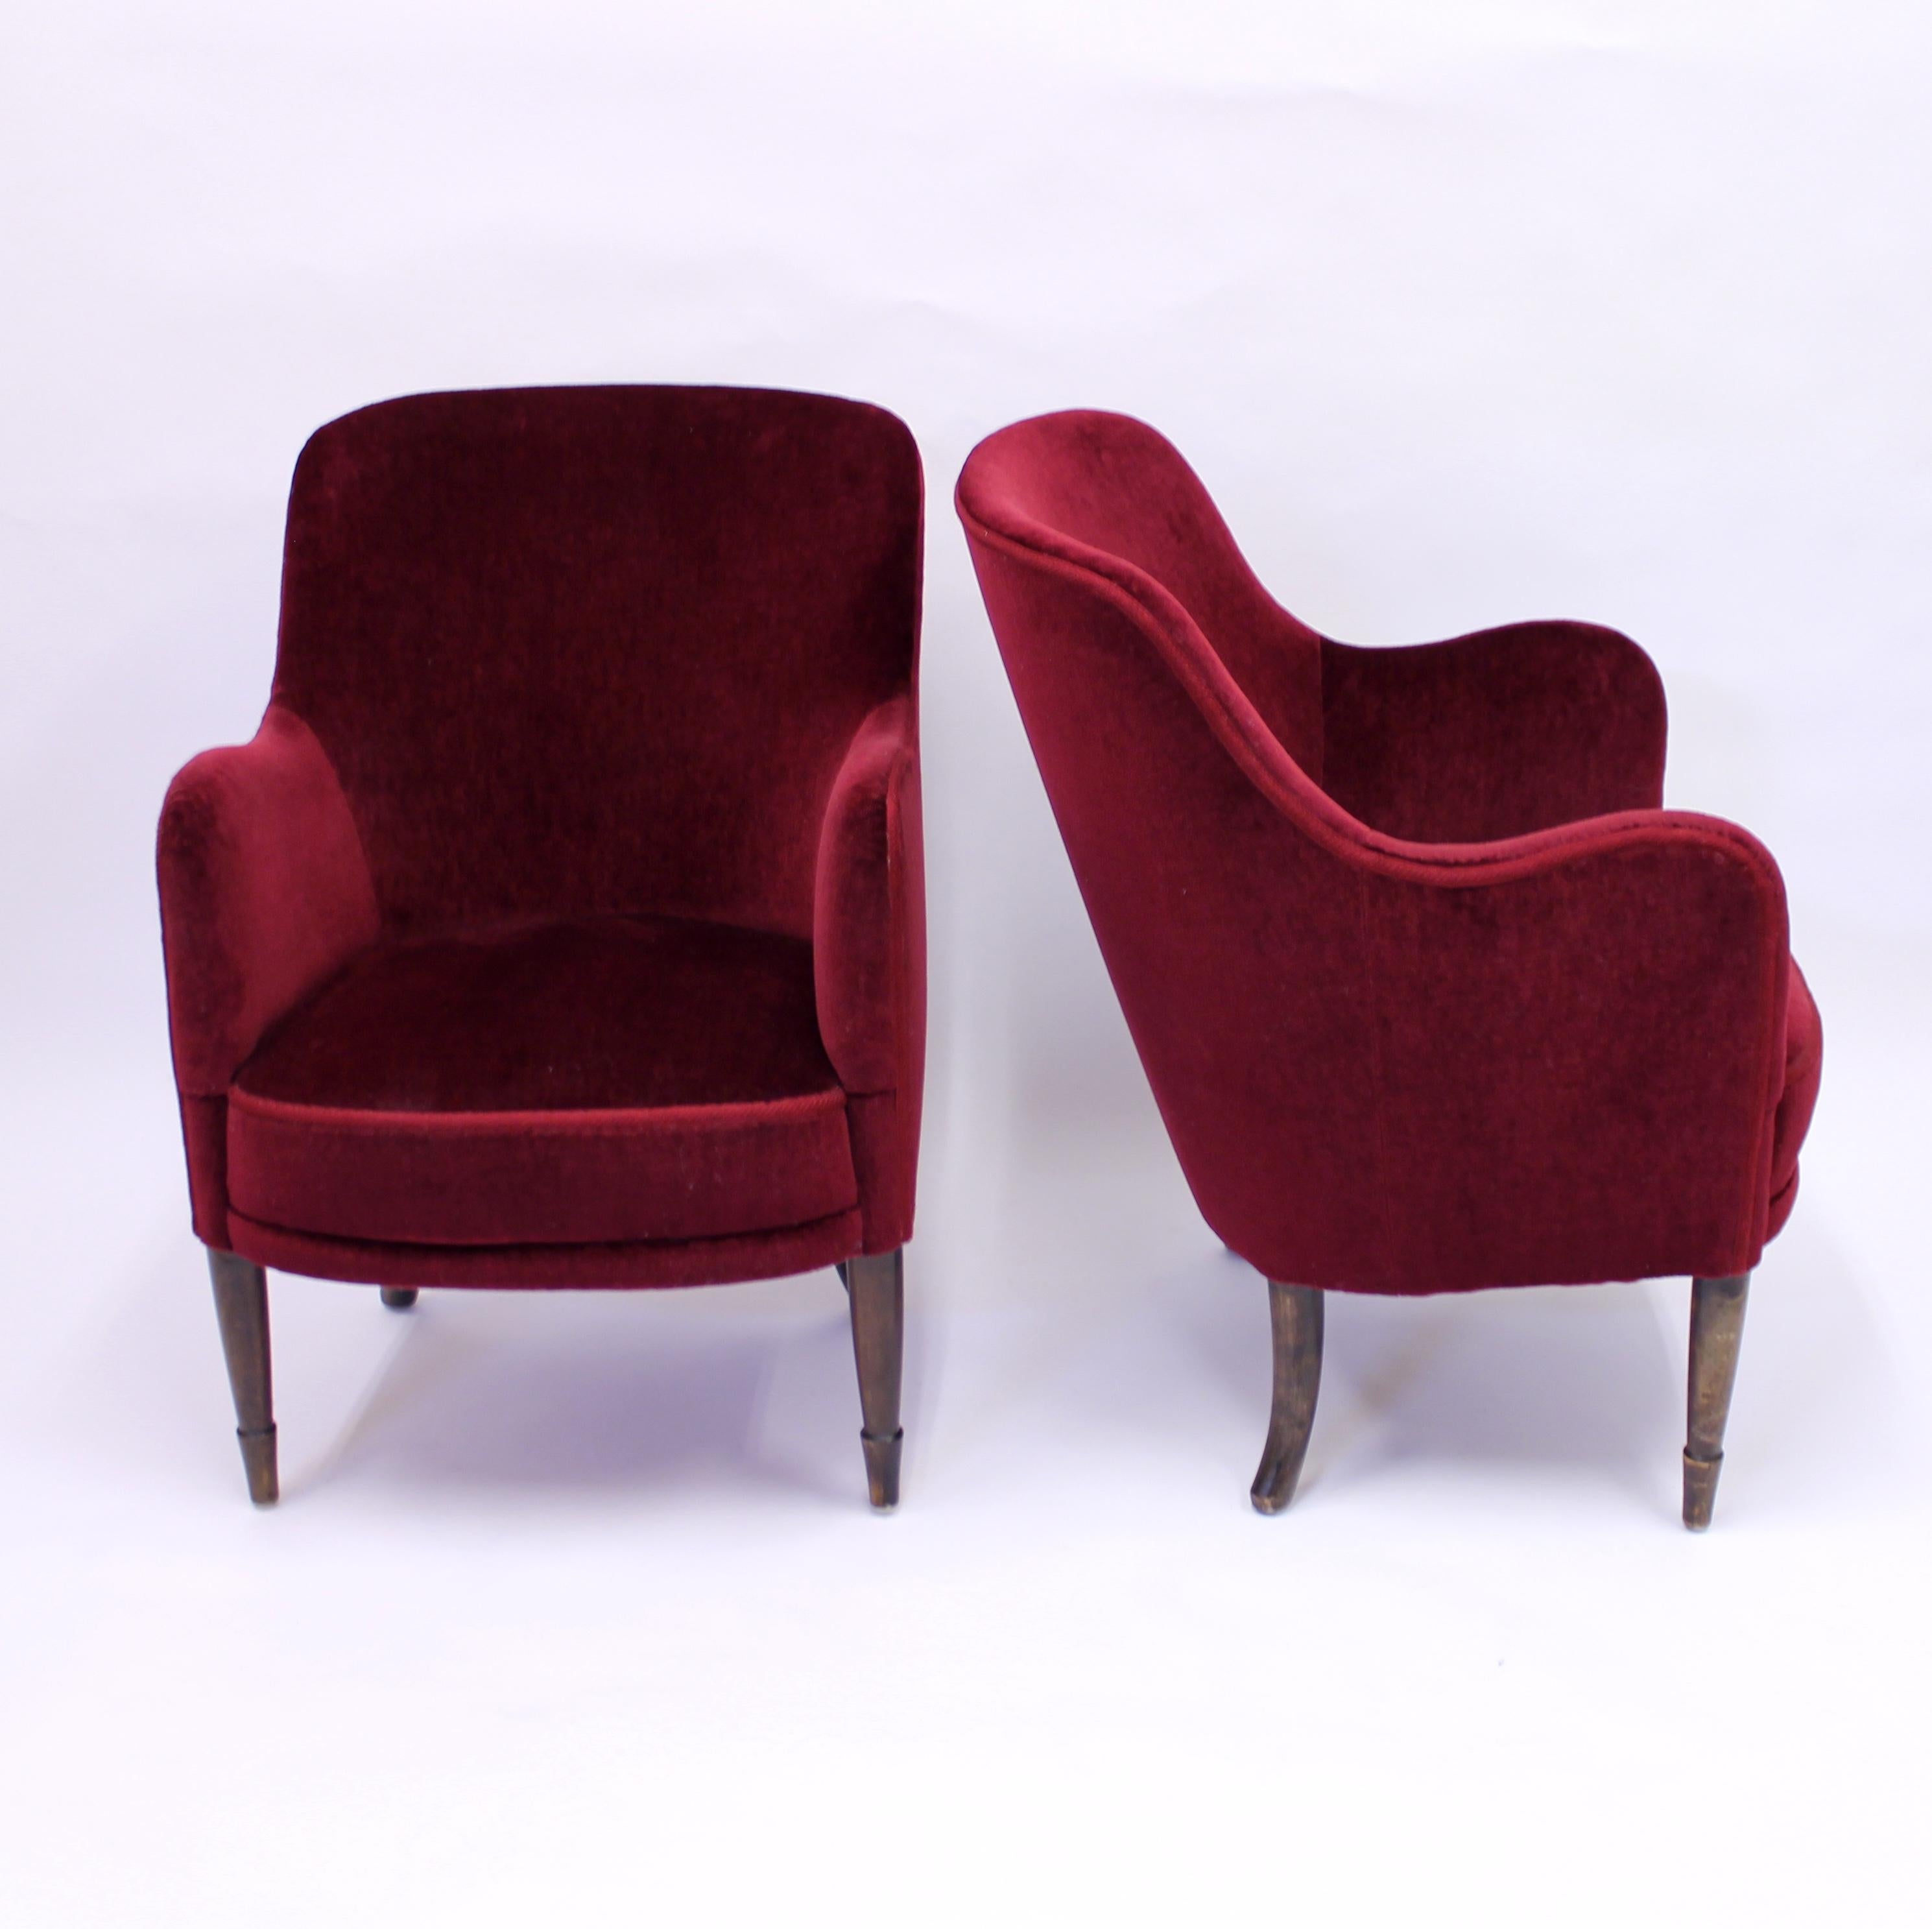 Early 20th Century Carl Malmsten, Pair of Konsert Lounge Chairs for Stockholm Concert Hall, 1926 For Sale